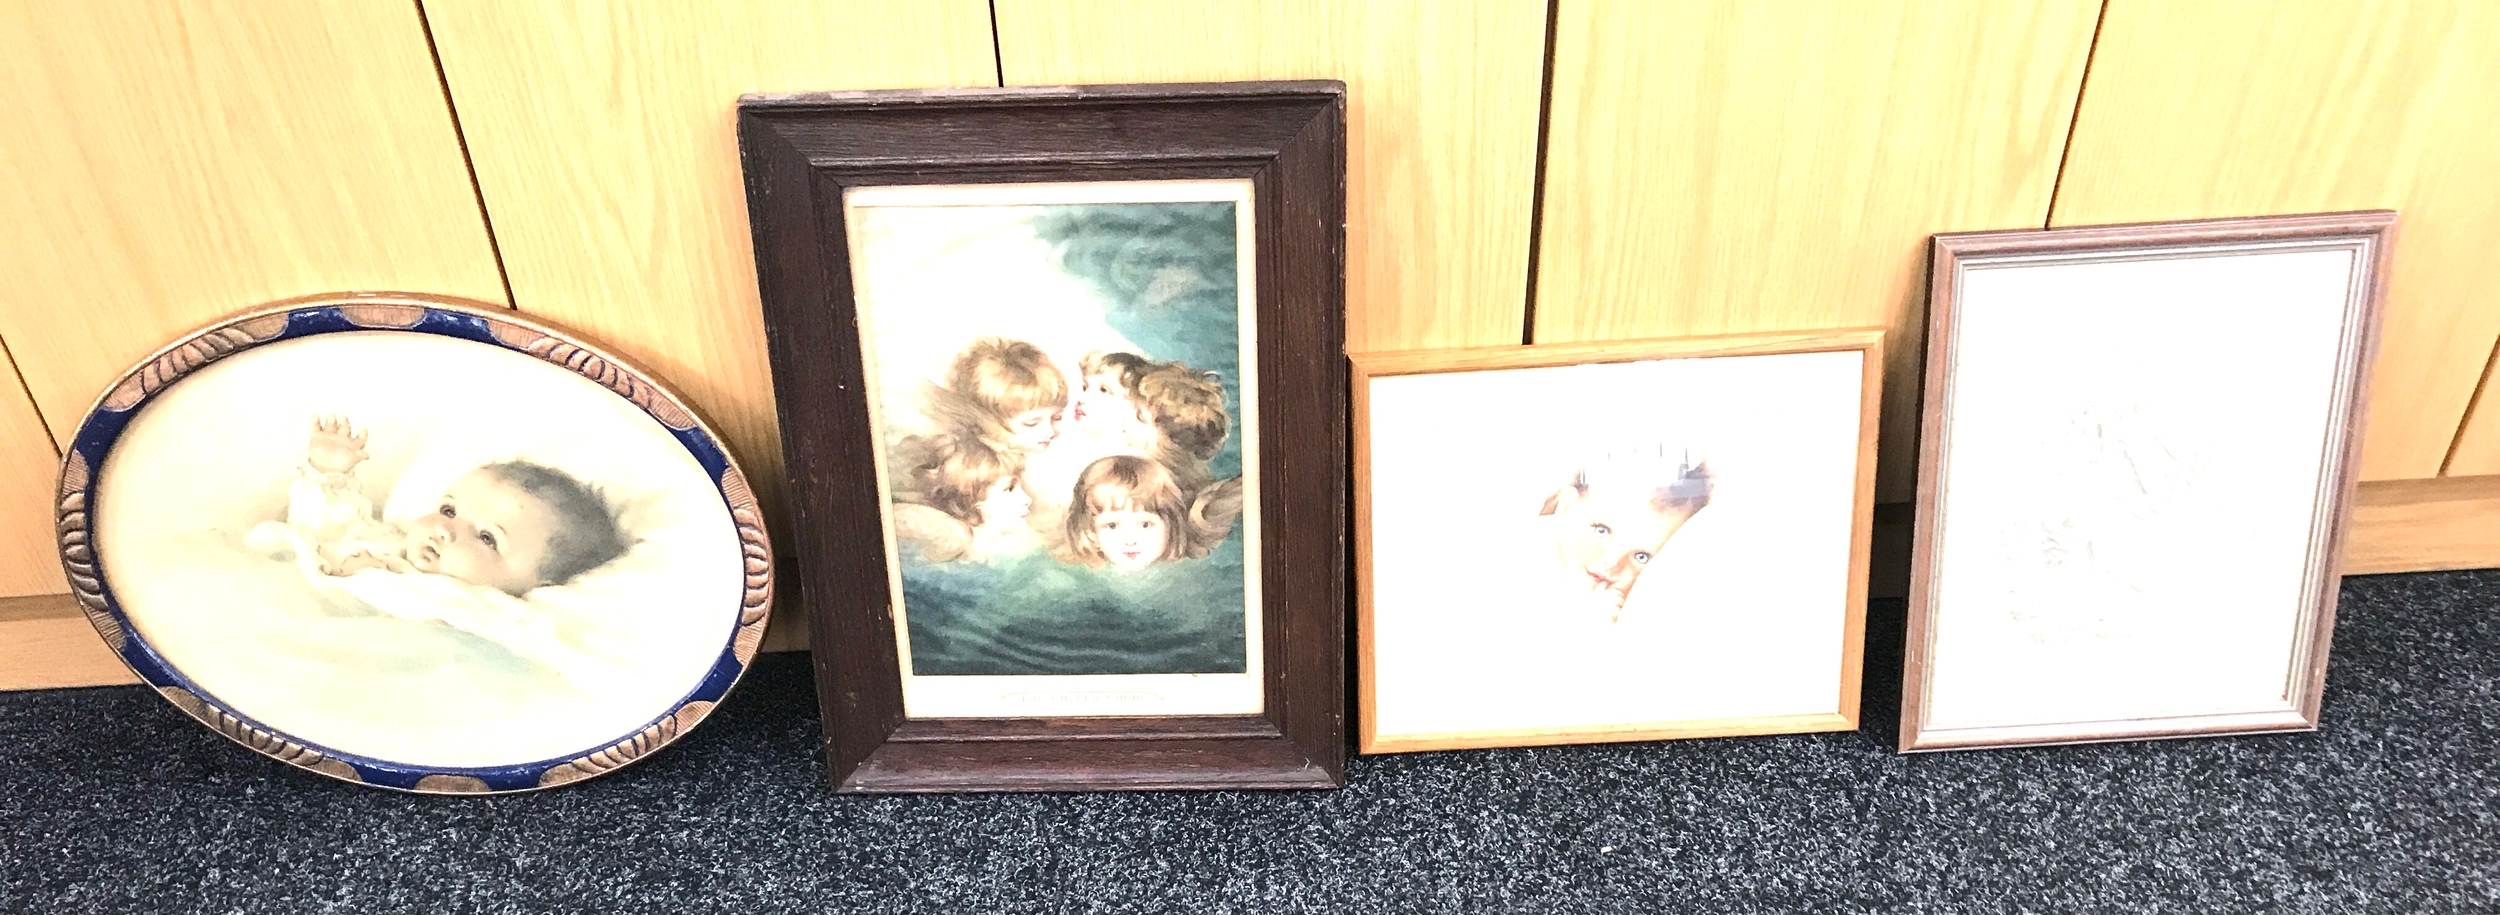 Selection of framed prints, largest measures approximately 18 inches by 13 inches